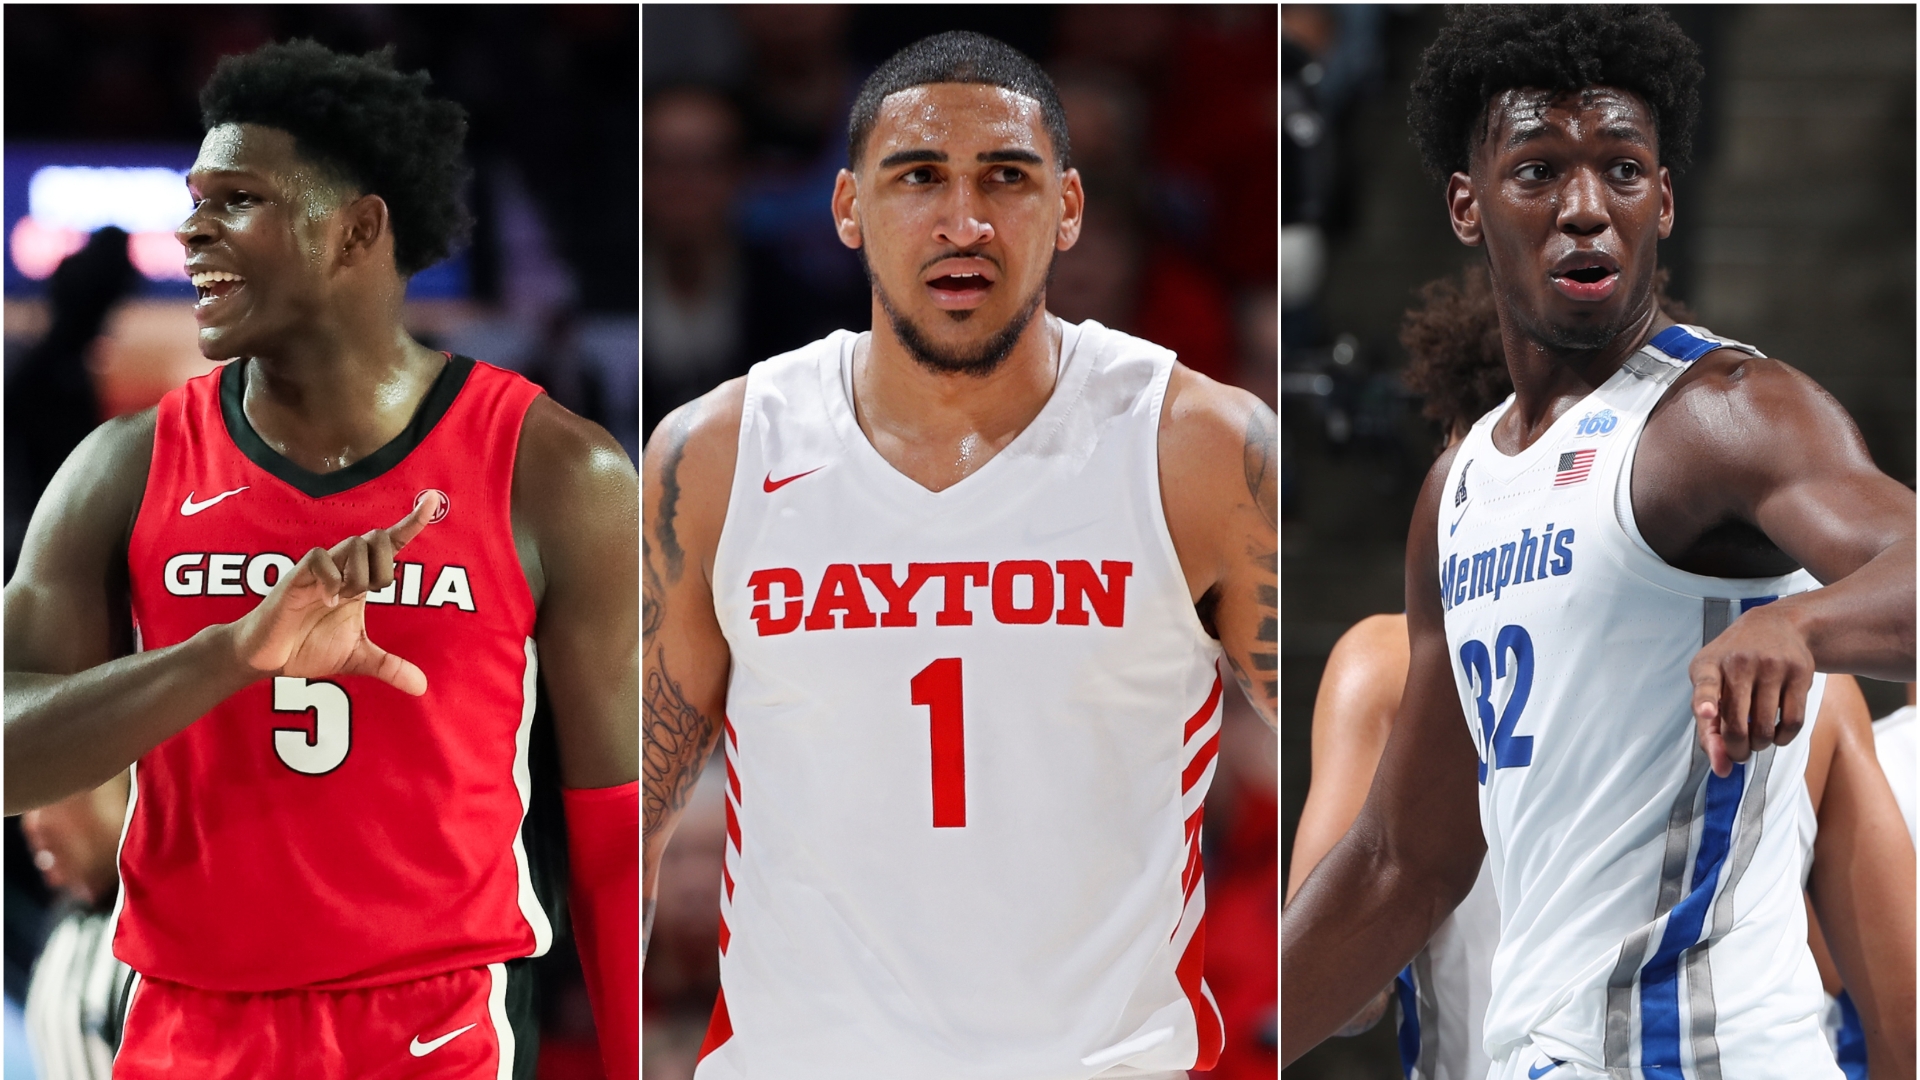 The best plays from this year's NBA draft prospects